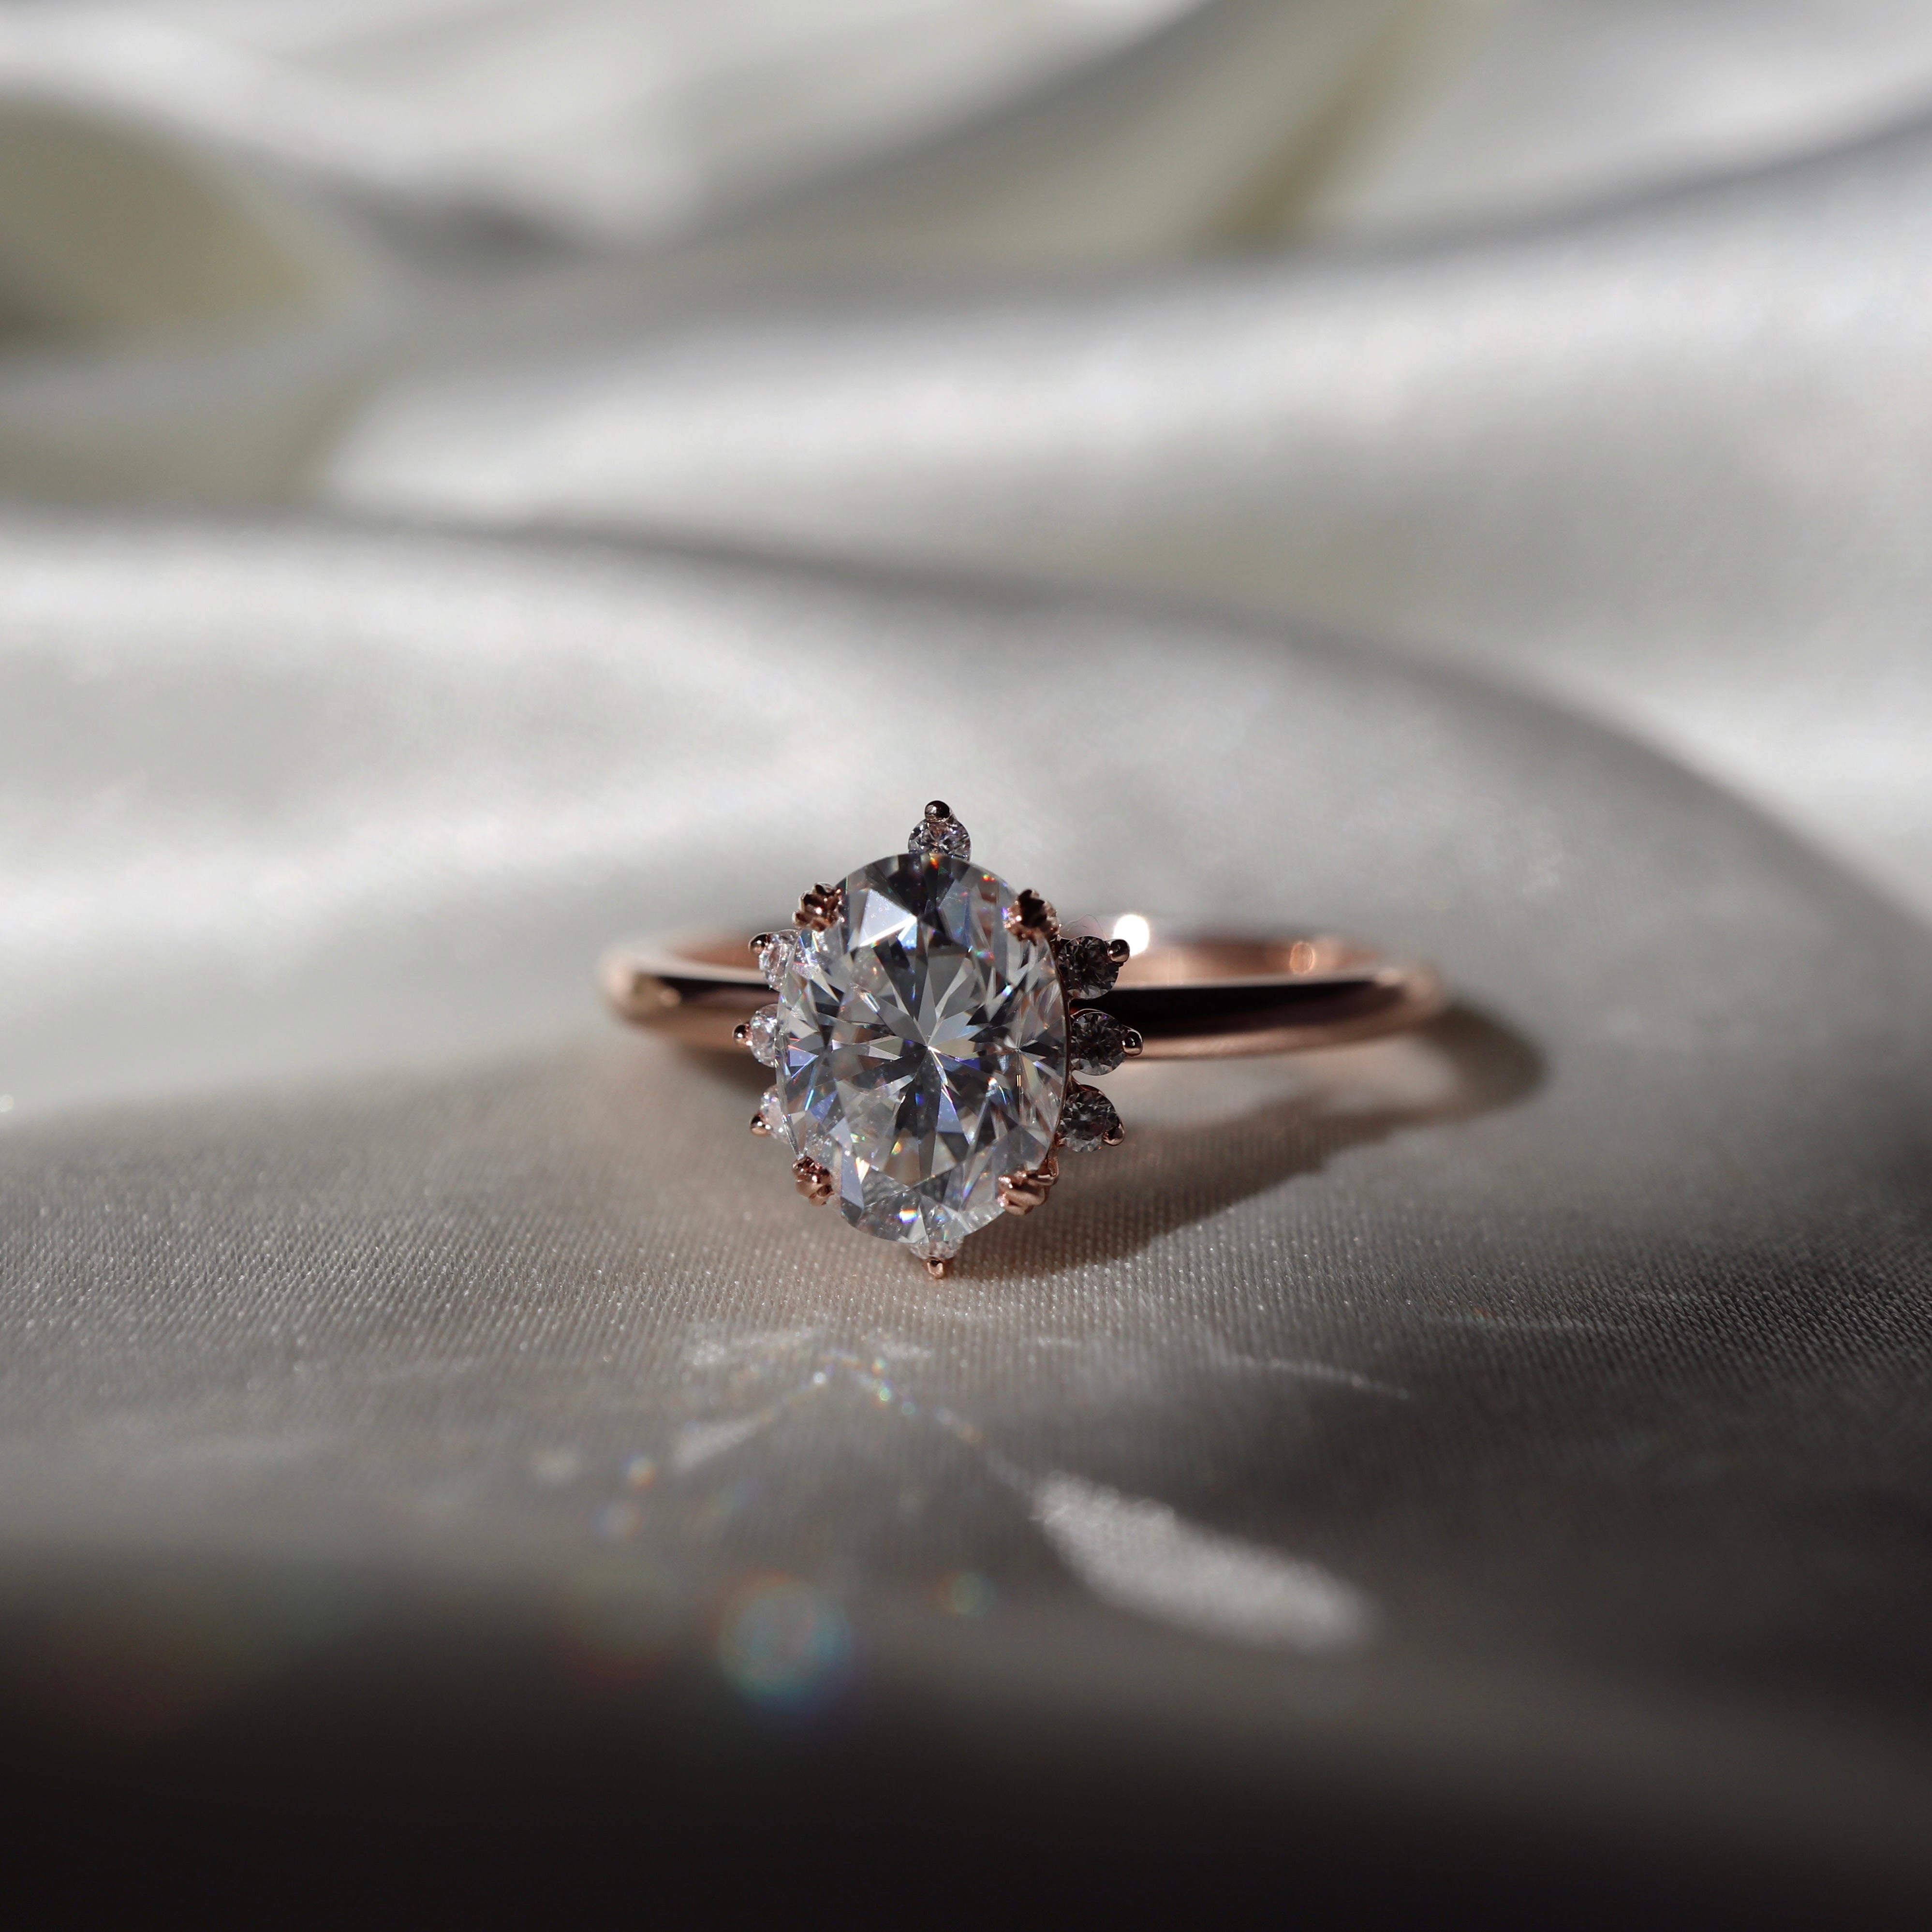 The Carmen Ring - Oval With Dainty Halo Stones